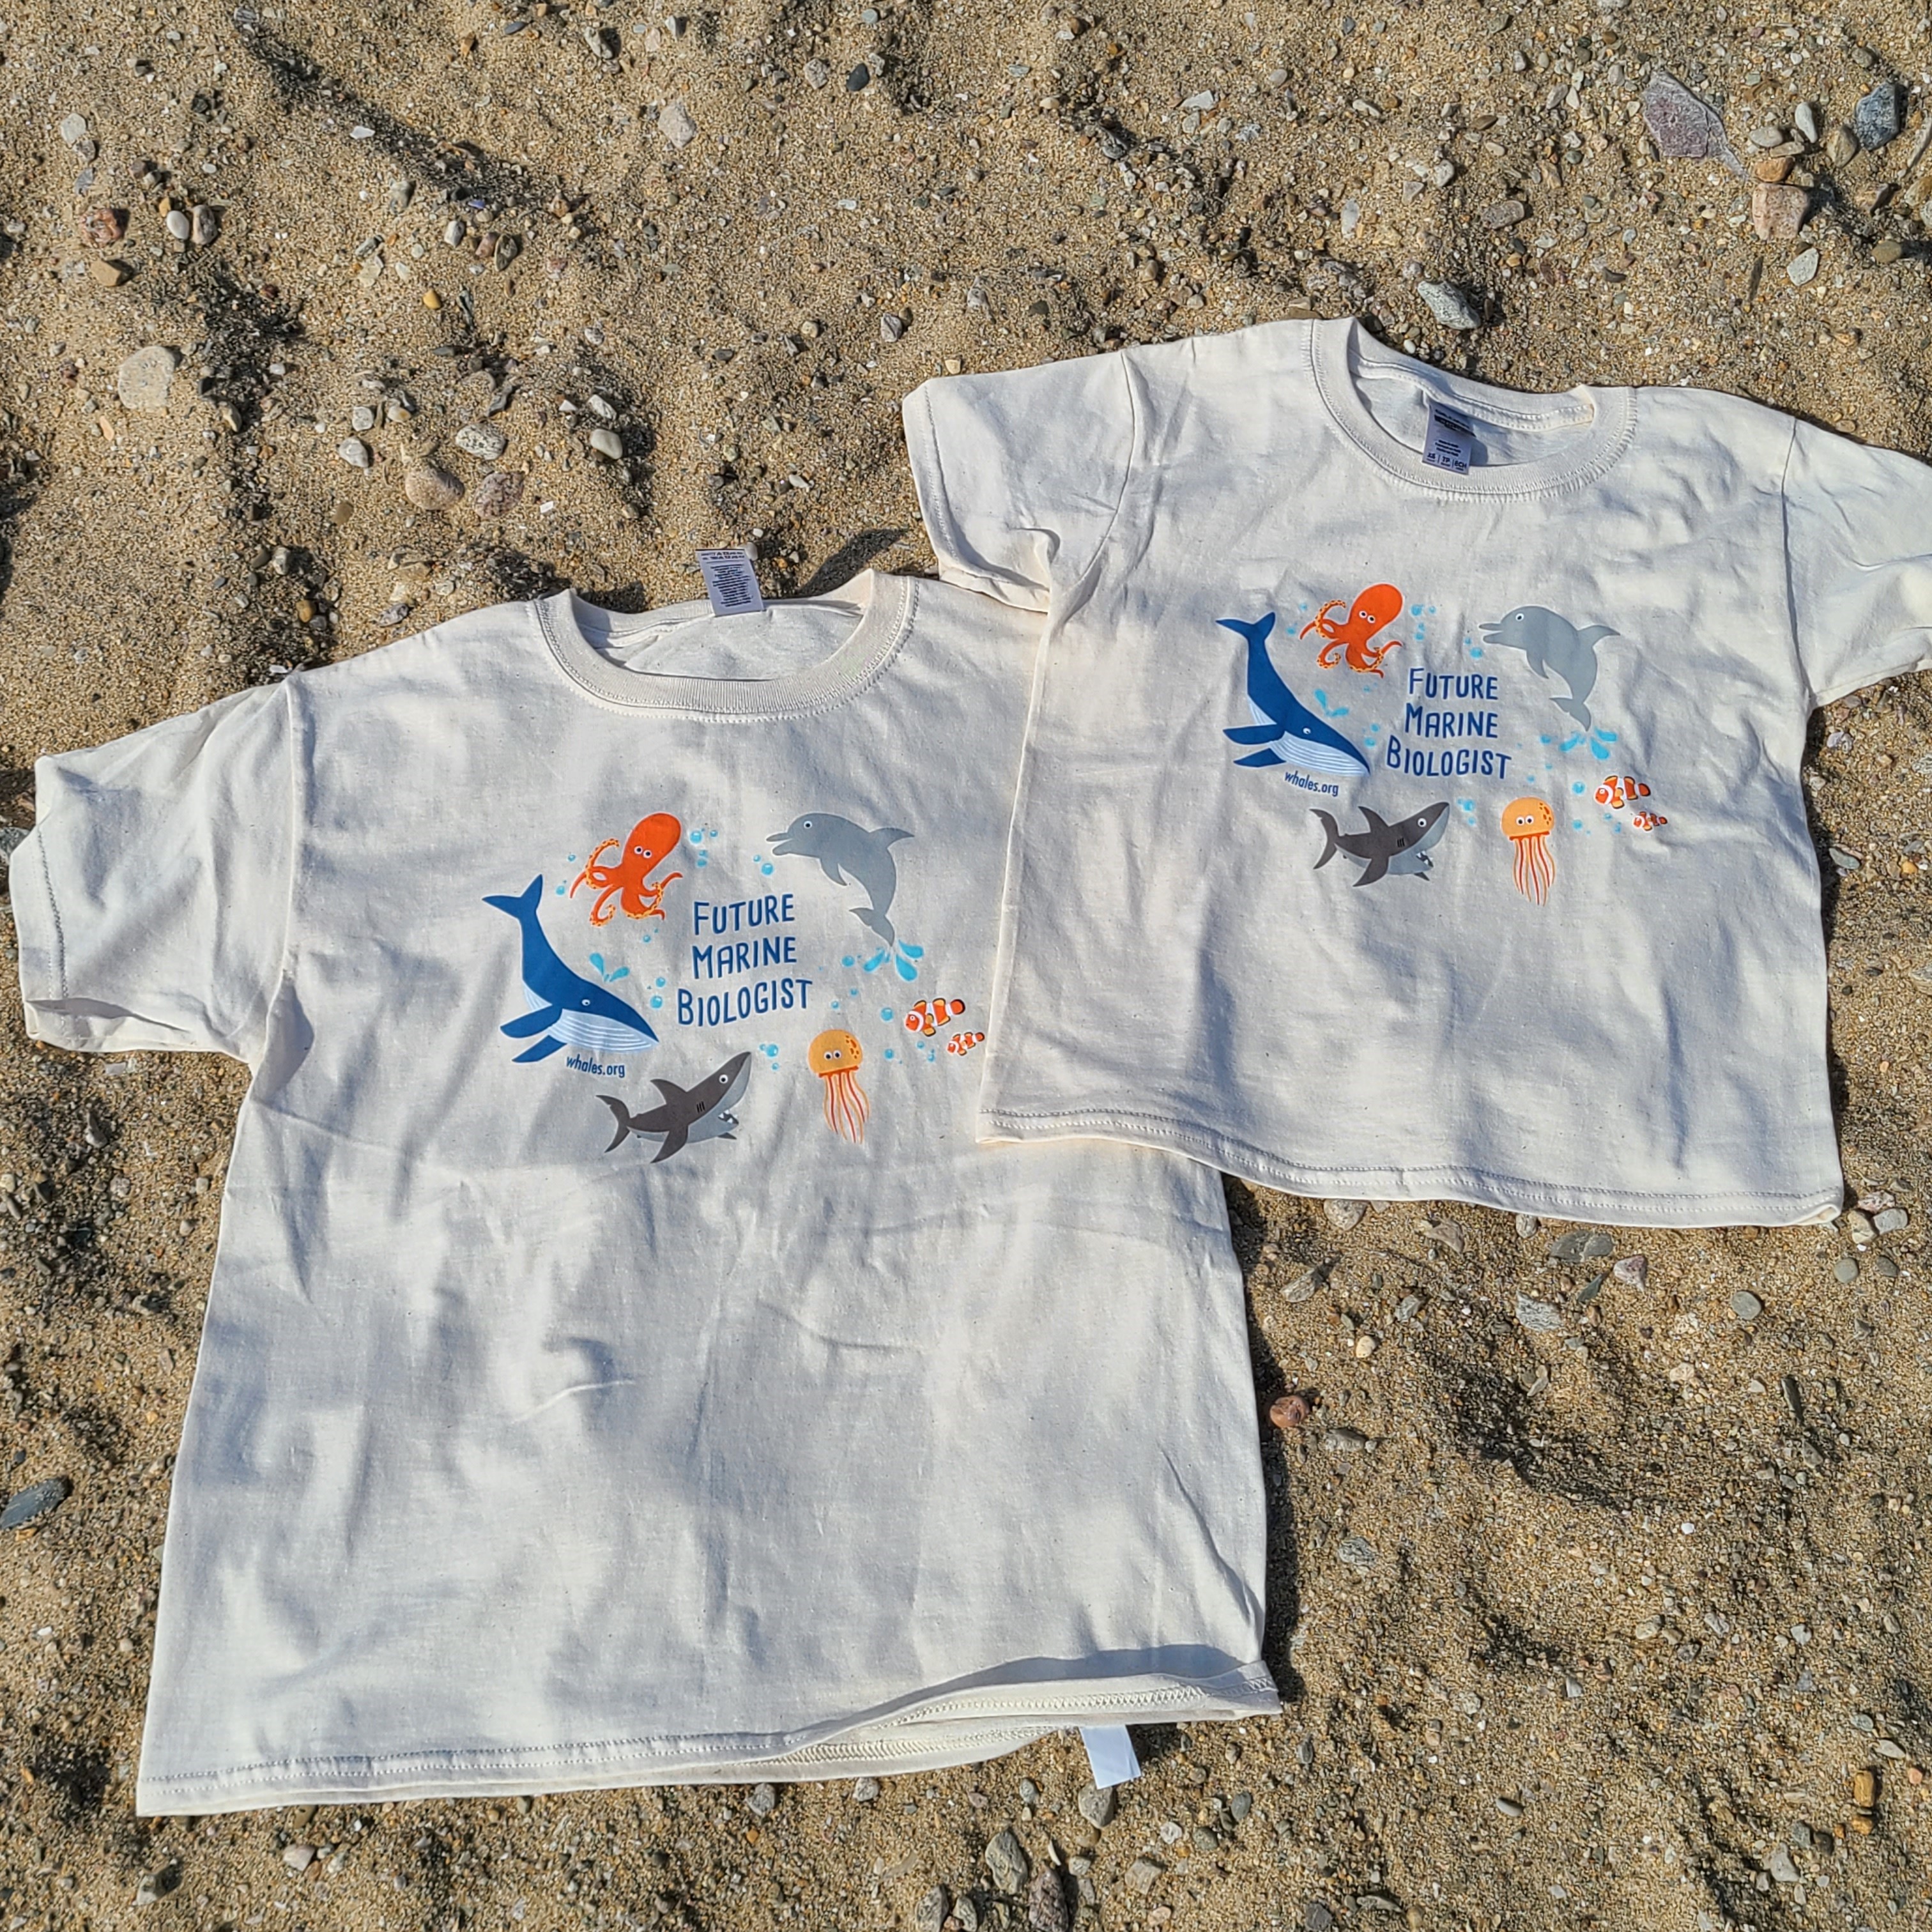 Children's teeshirt with text "I want to be a marine biologist" on front, with cartoon images of a dolphin, whale, octopus, shark, and jelly fish